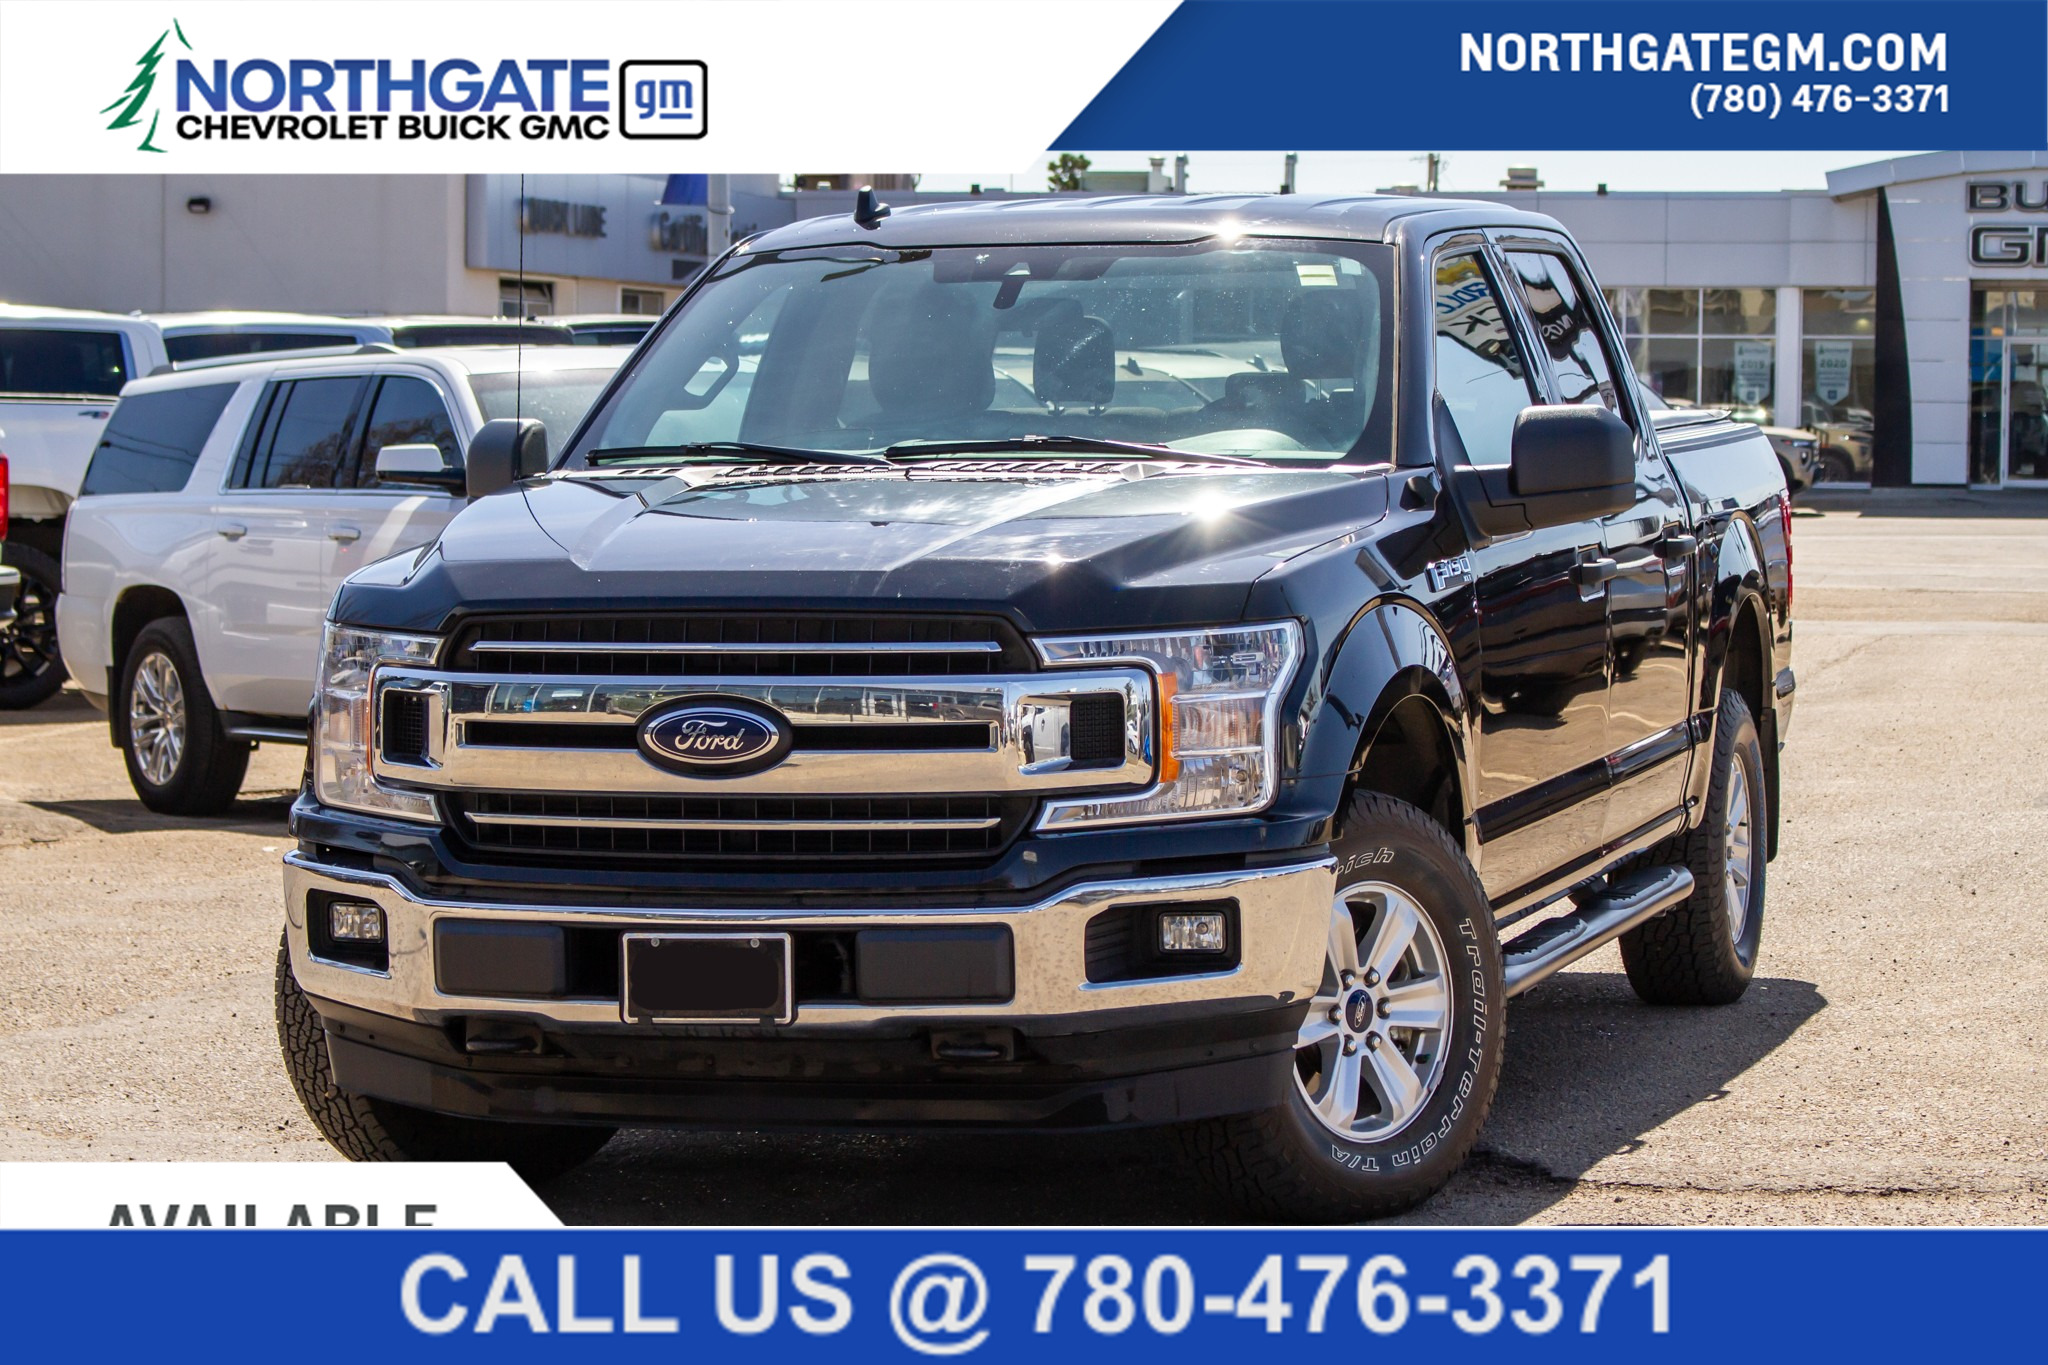 2020 Ford F-150 XLT XLT | TOUCHSCREEN | REMOTE START | POWER SEATS